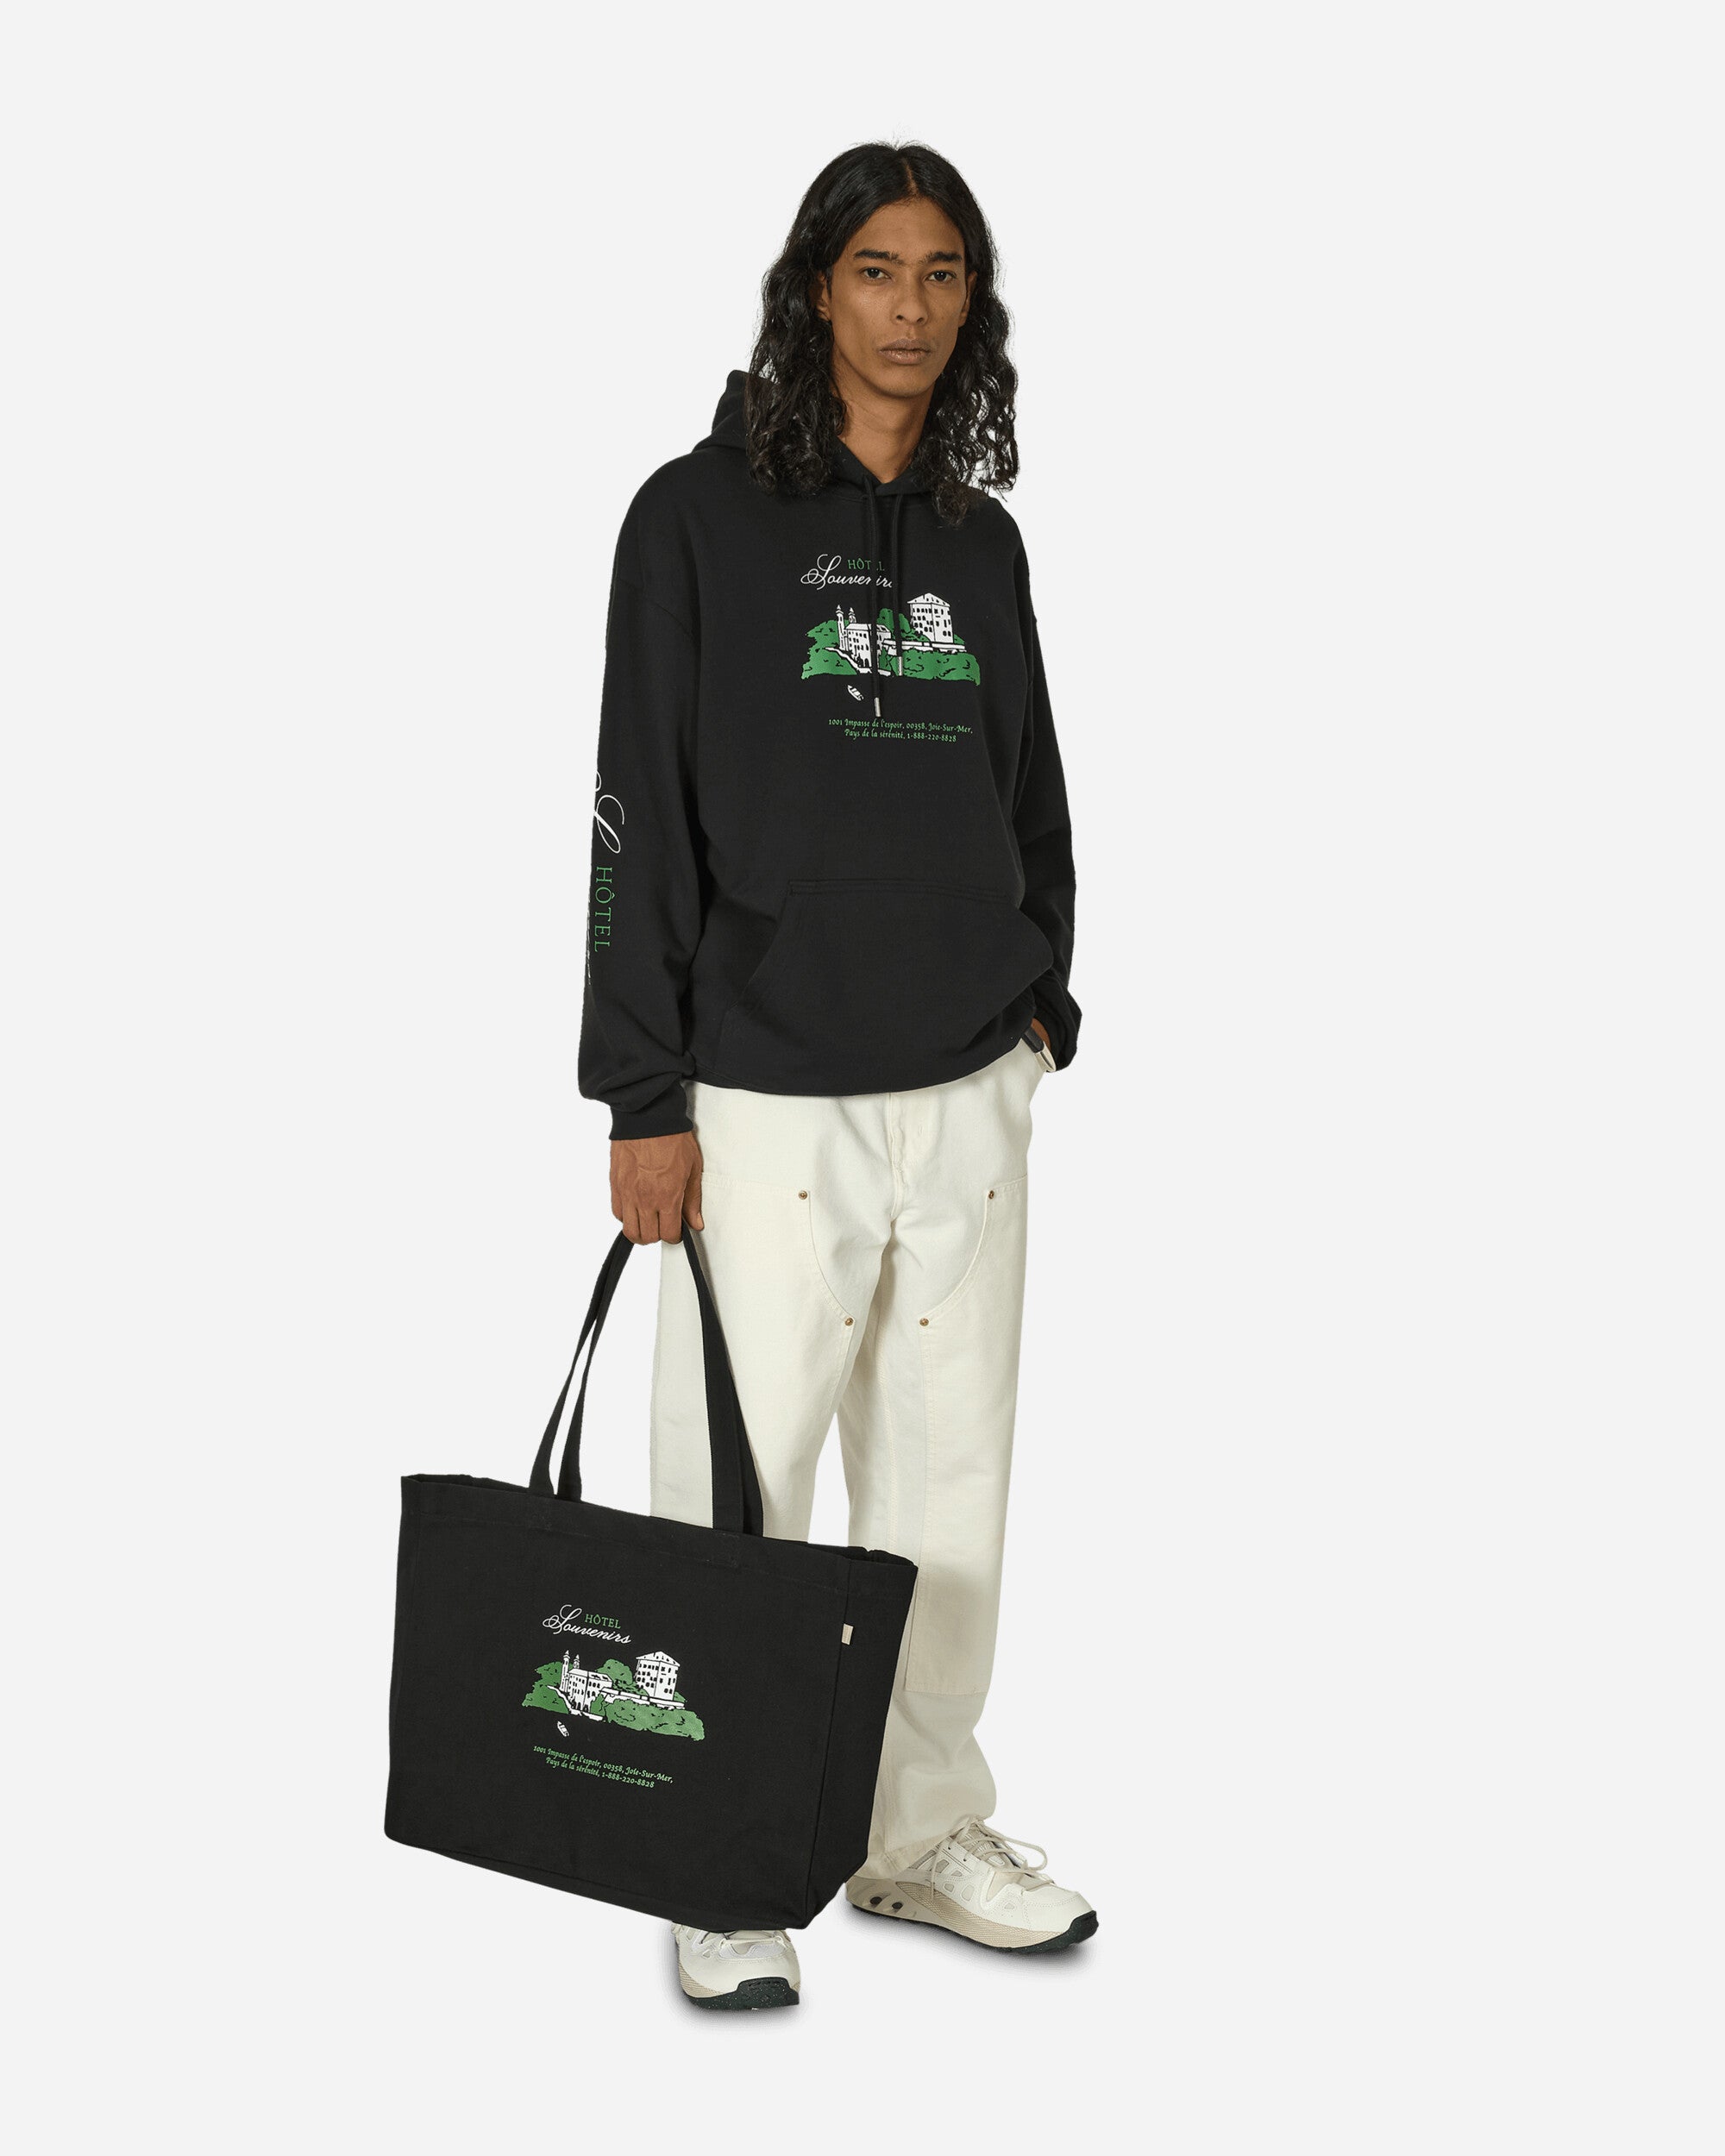 A.P.C. Cabas Jjjjound Black Bags and Backpacks Tote Bags COHDN-M61945 LZZ